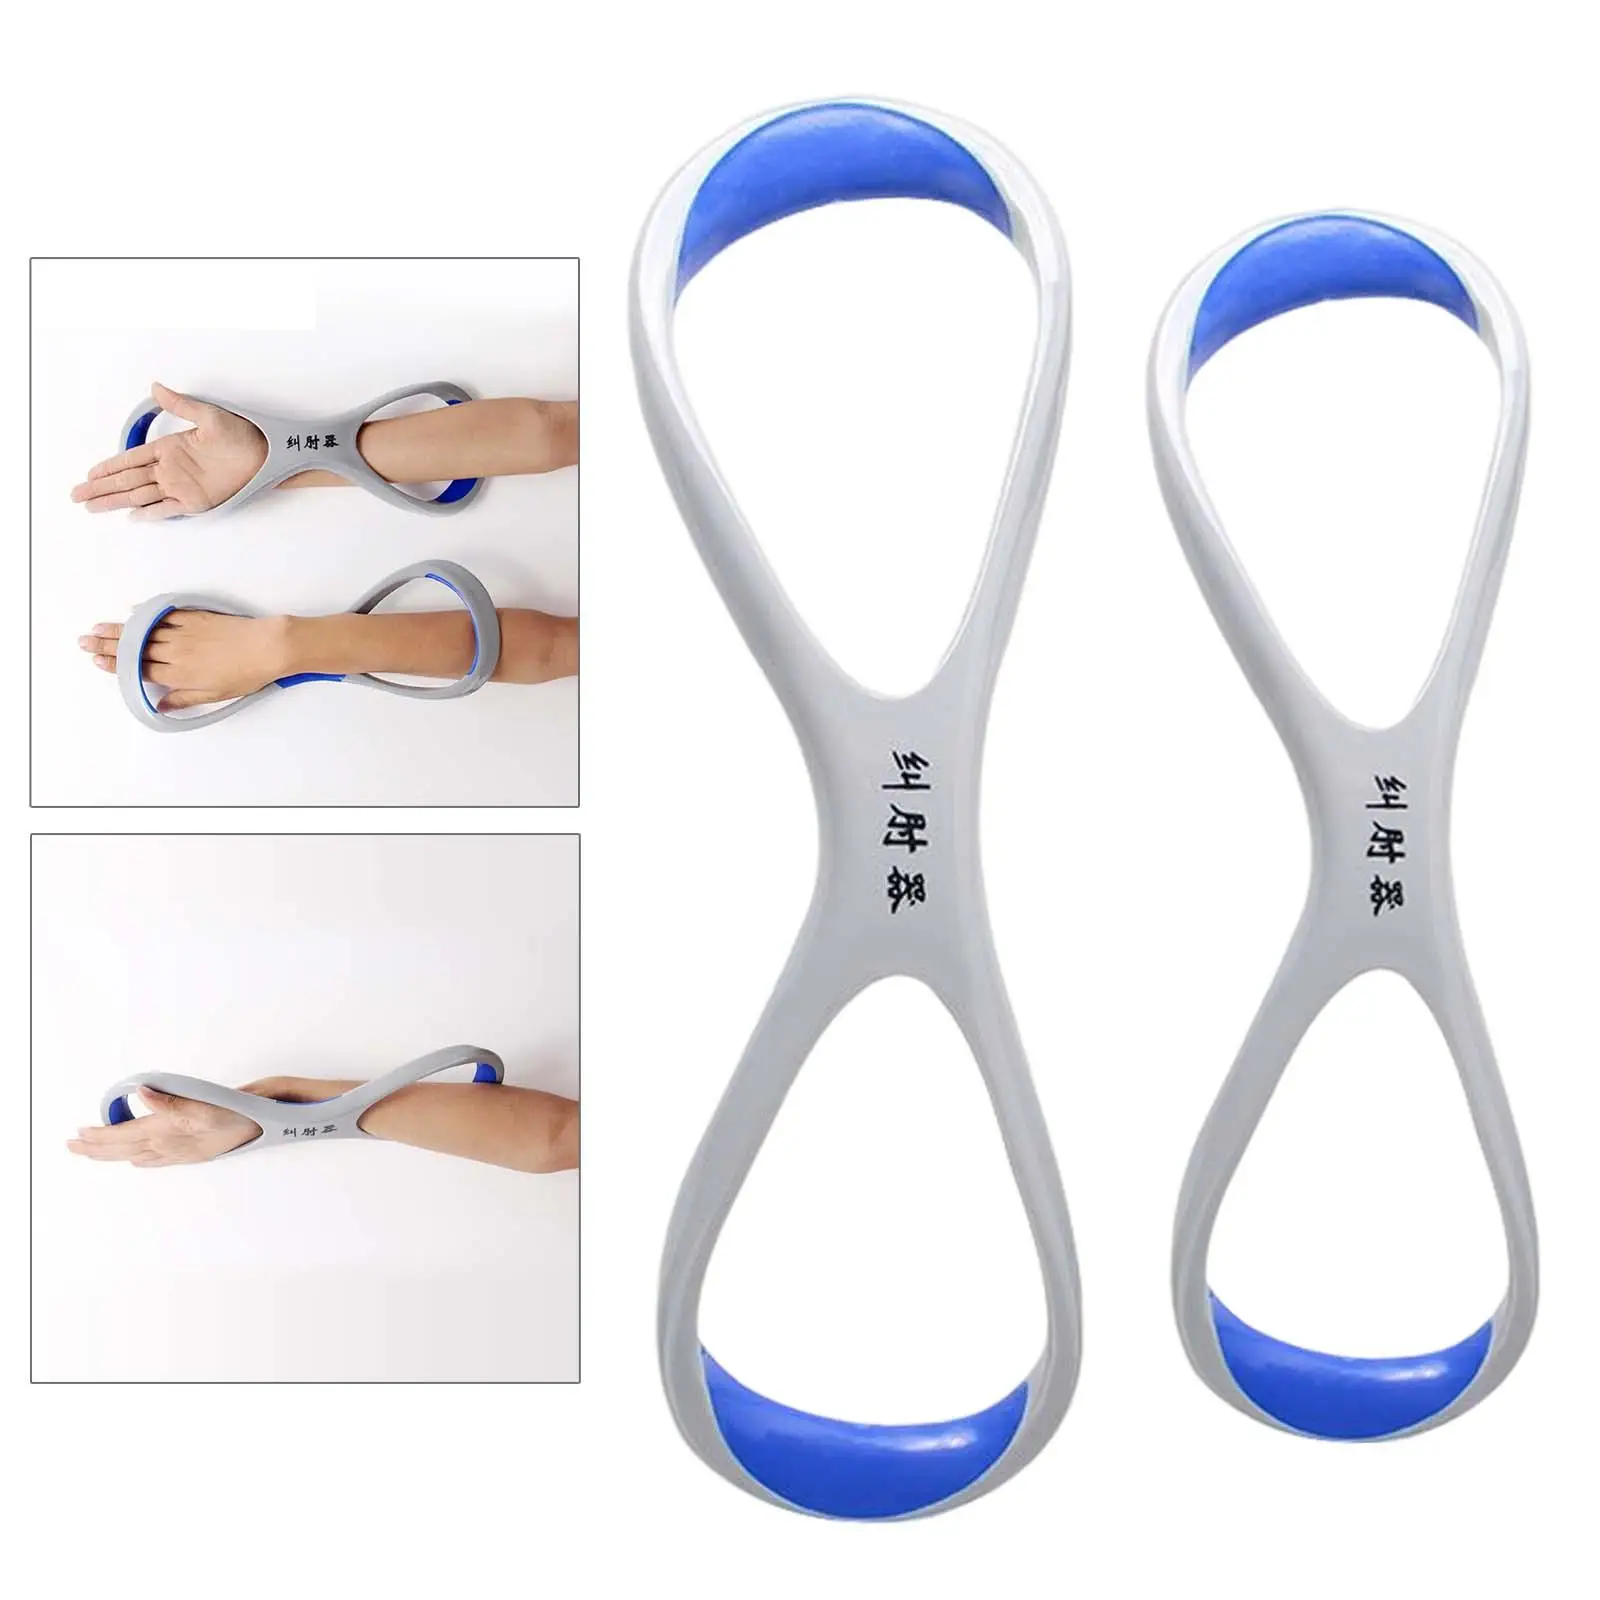 1 Piece Swimming Forearm Fulcrum ABS 8-Shaped Tools for Unisex